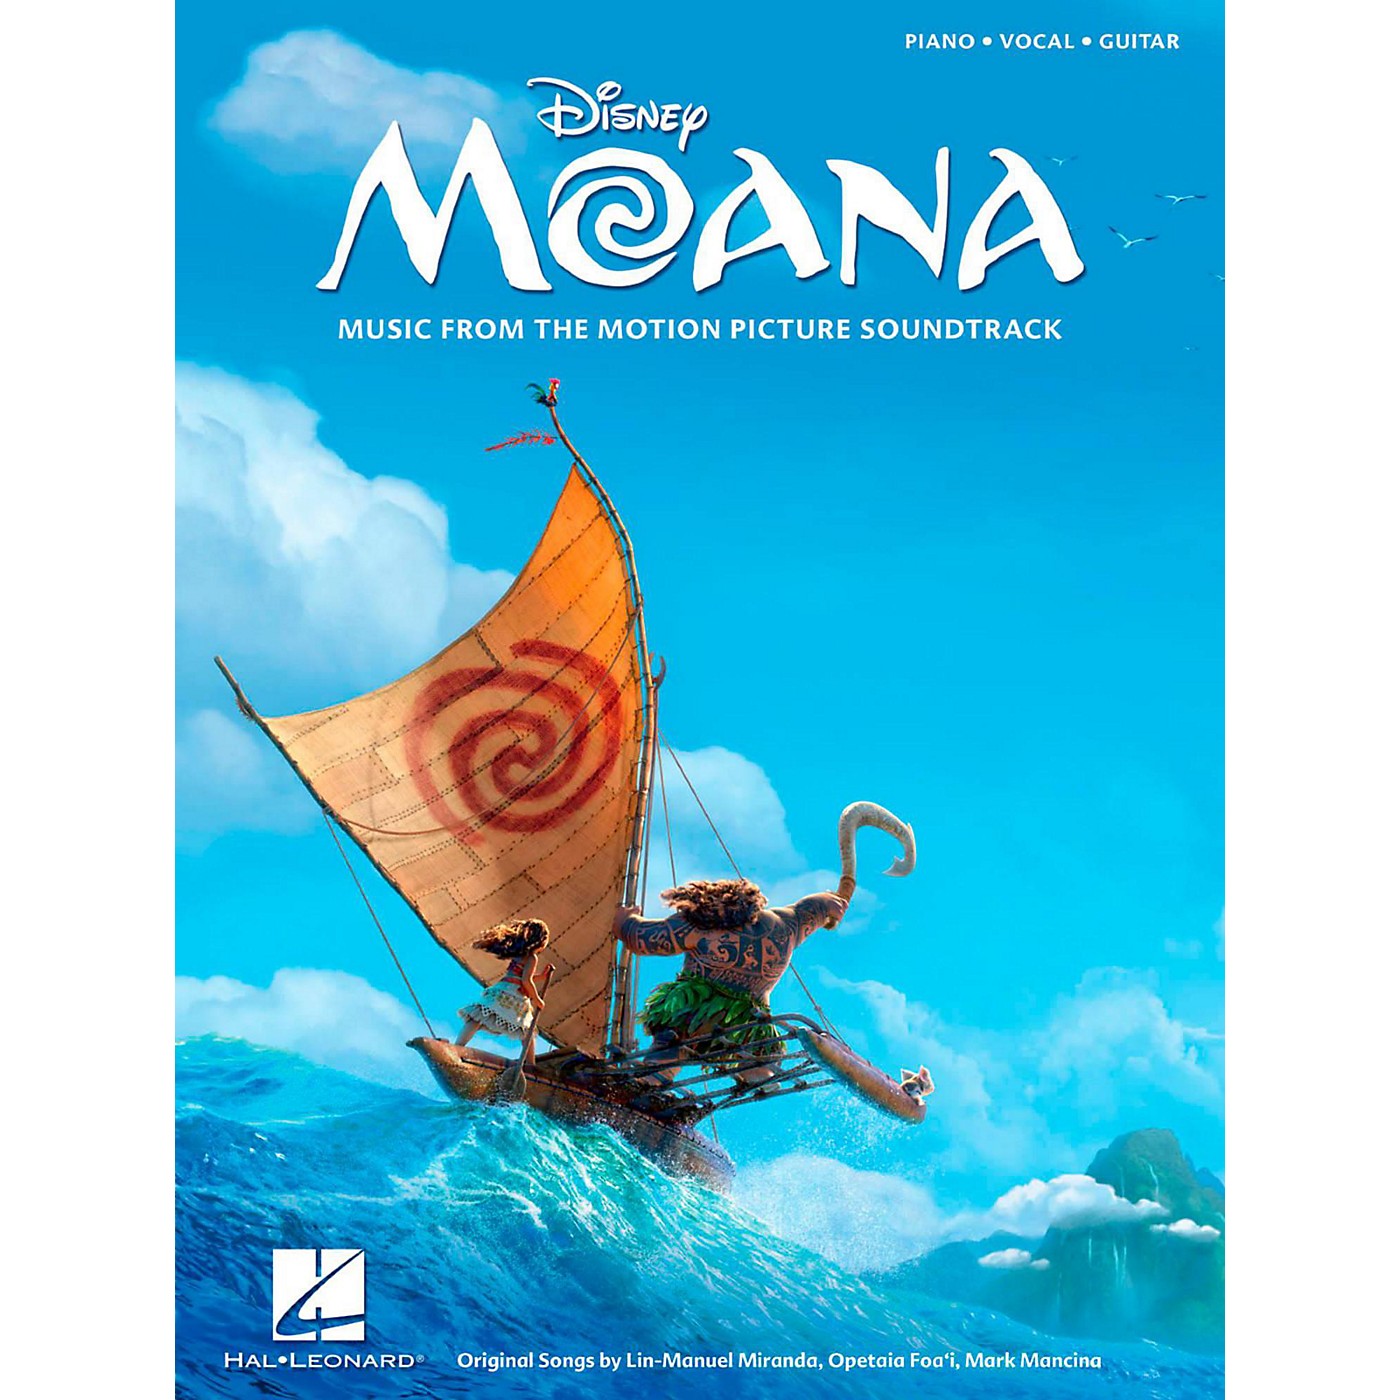 Hal Leonard Moana - Music from The Motion Picture Soundtrack Piano/Vocal/Guitar thumbnail